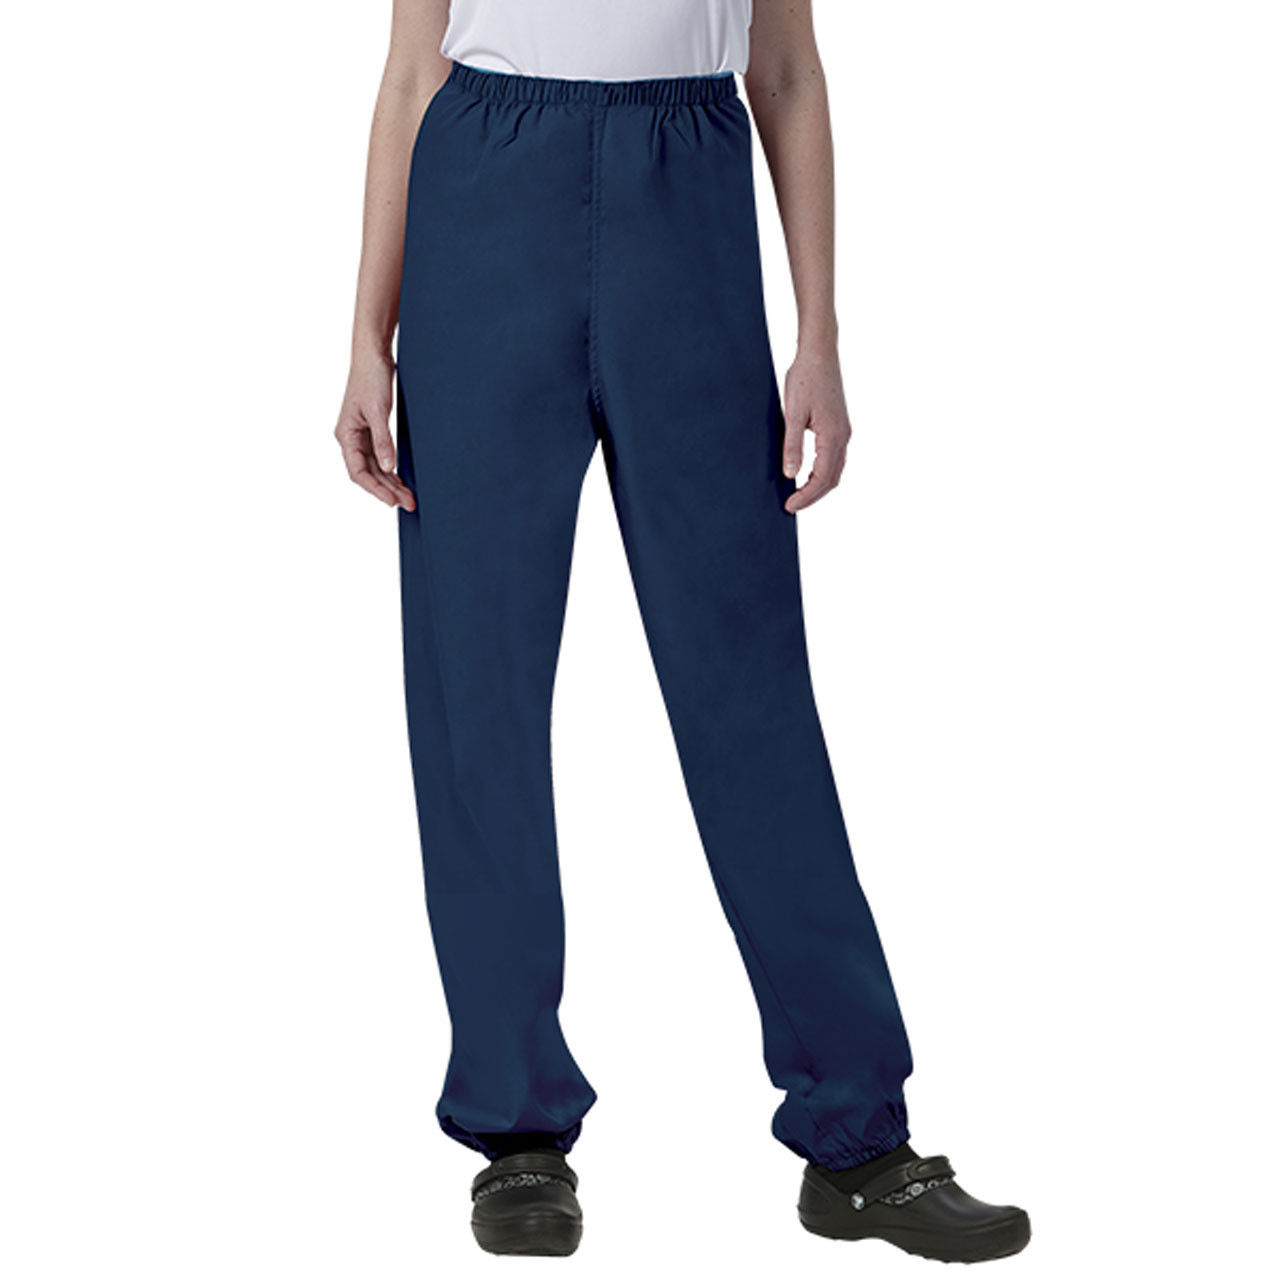 Do these fashion seal scrub pants have elasticized ankles?